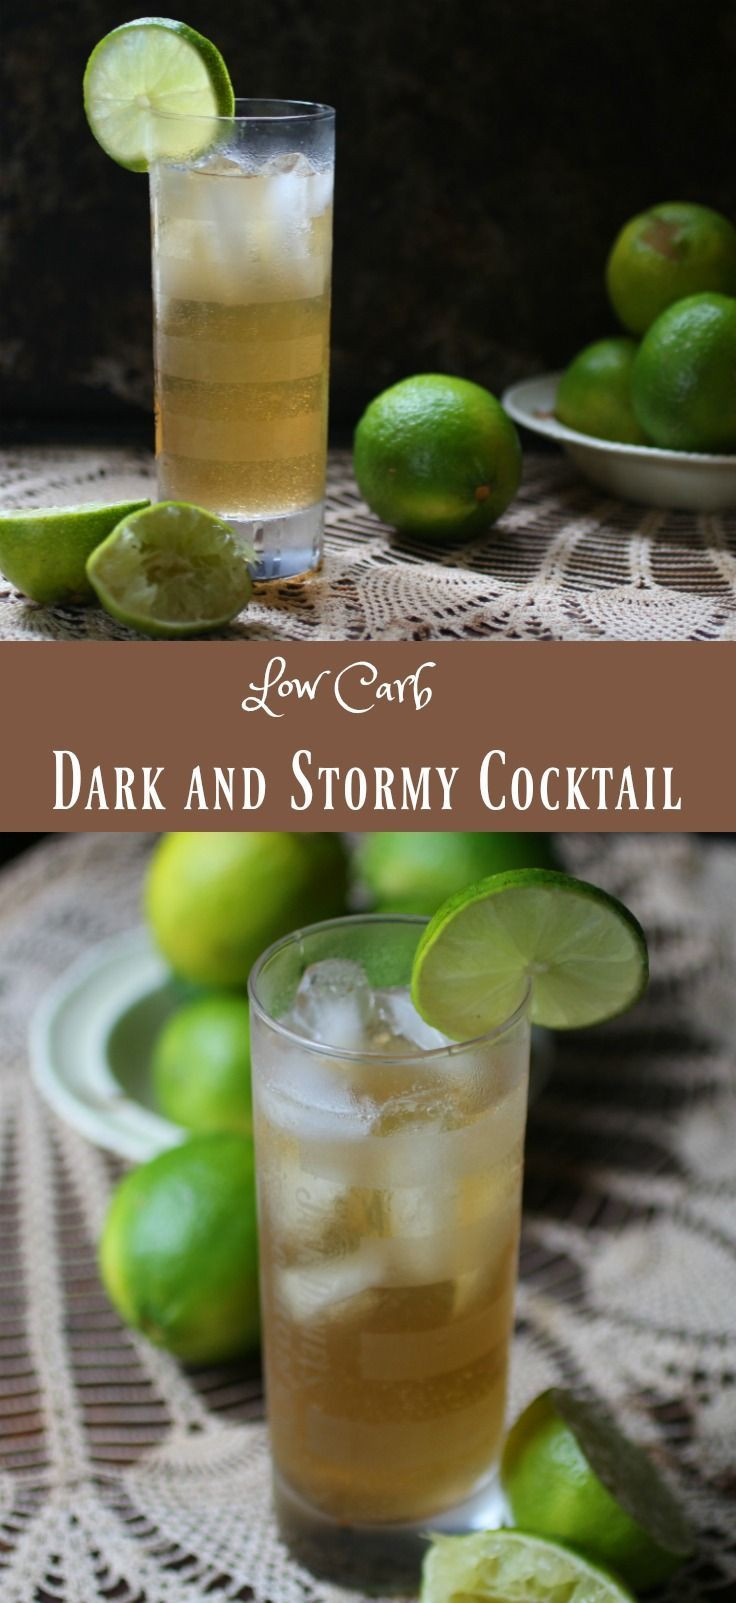 Low Carb Alcoholic Drink Recipes
 1000 images about Cocktails Mocktails and Other